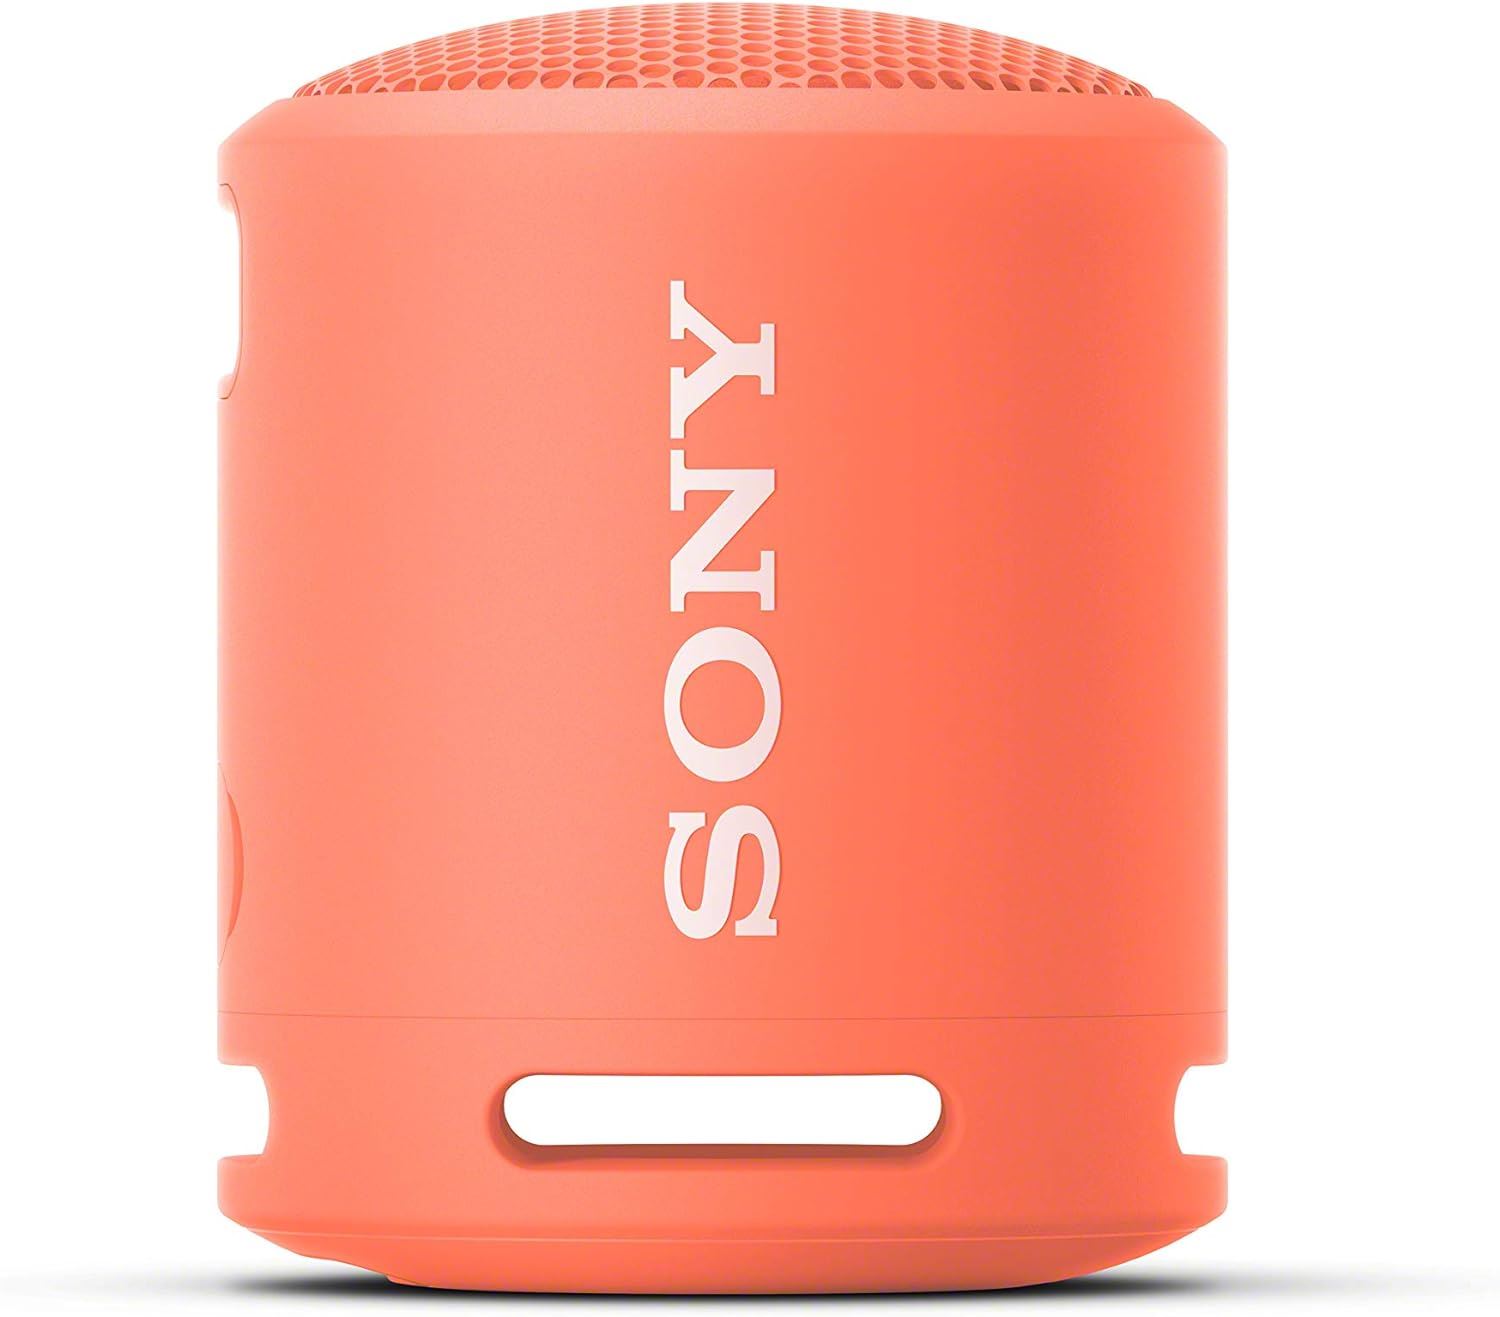 Official Sony SRS-XB13 Wireless Bluetooth Speaker Coral Pink - SRSXB13P.CE7